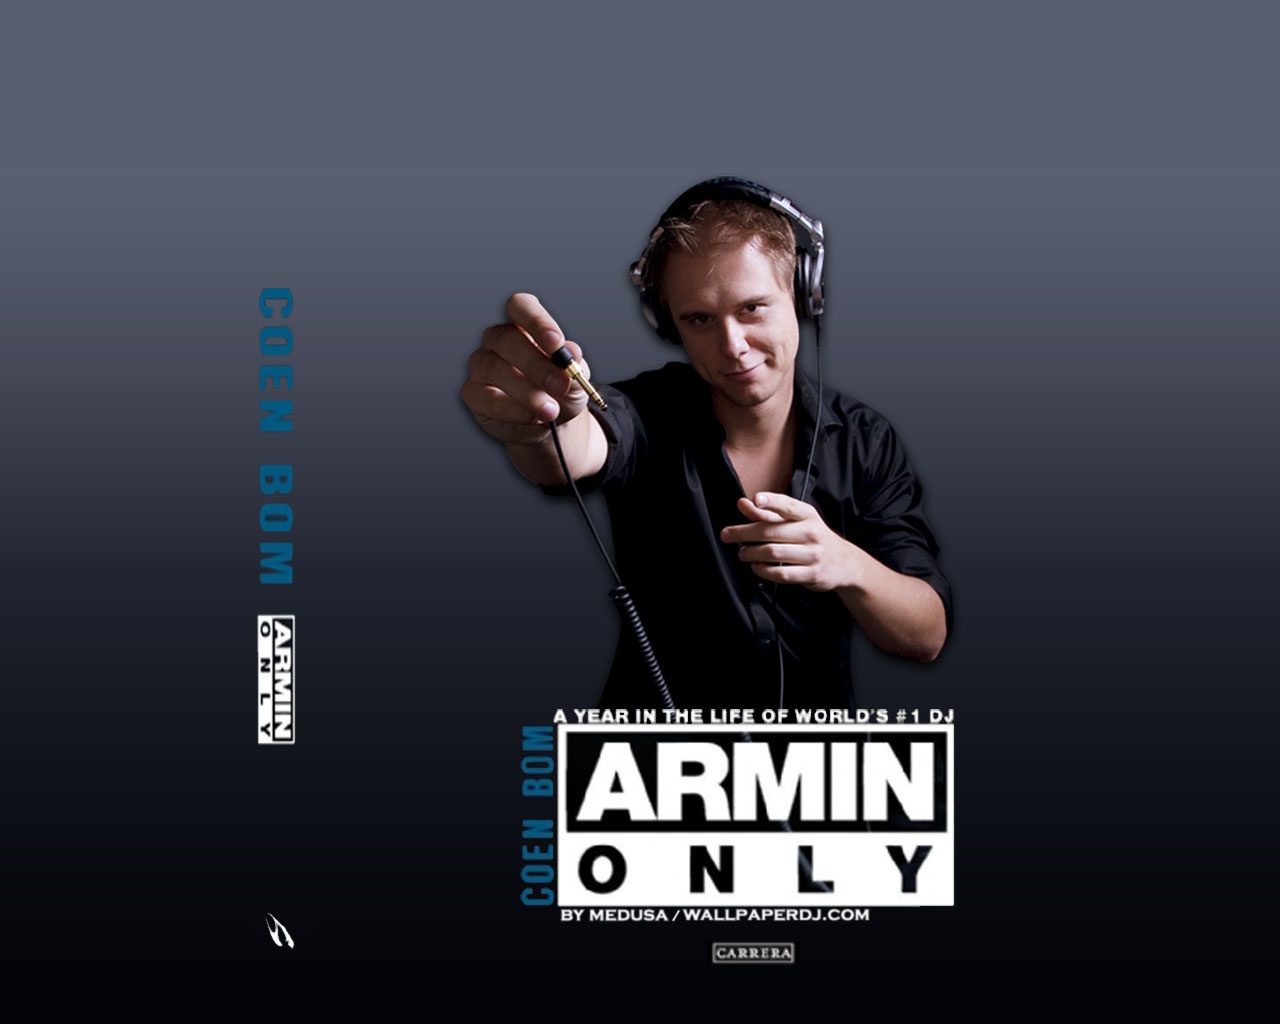 Armin ONLY - The Book HD and Wide Wallpapers